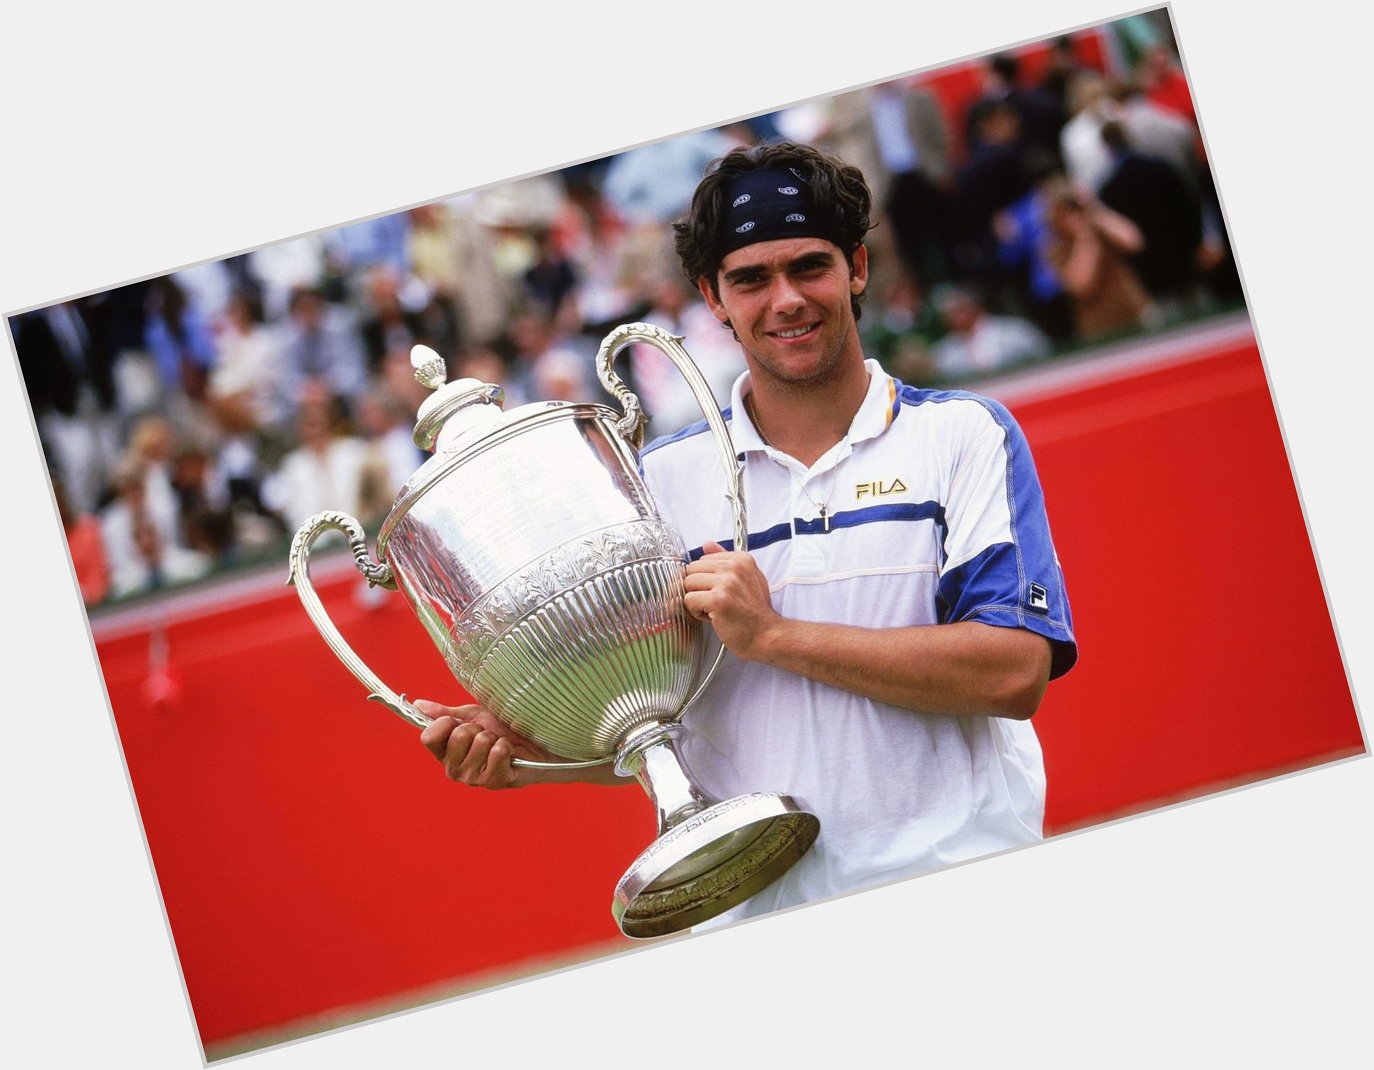 Happy birthday, Mark Philippoussis! 

The 1997 champ is 42 today. 